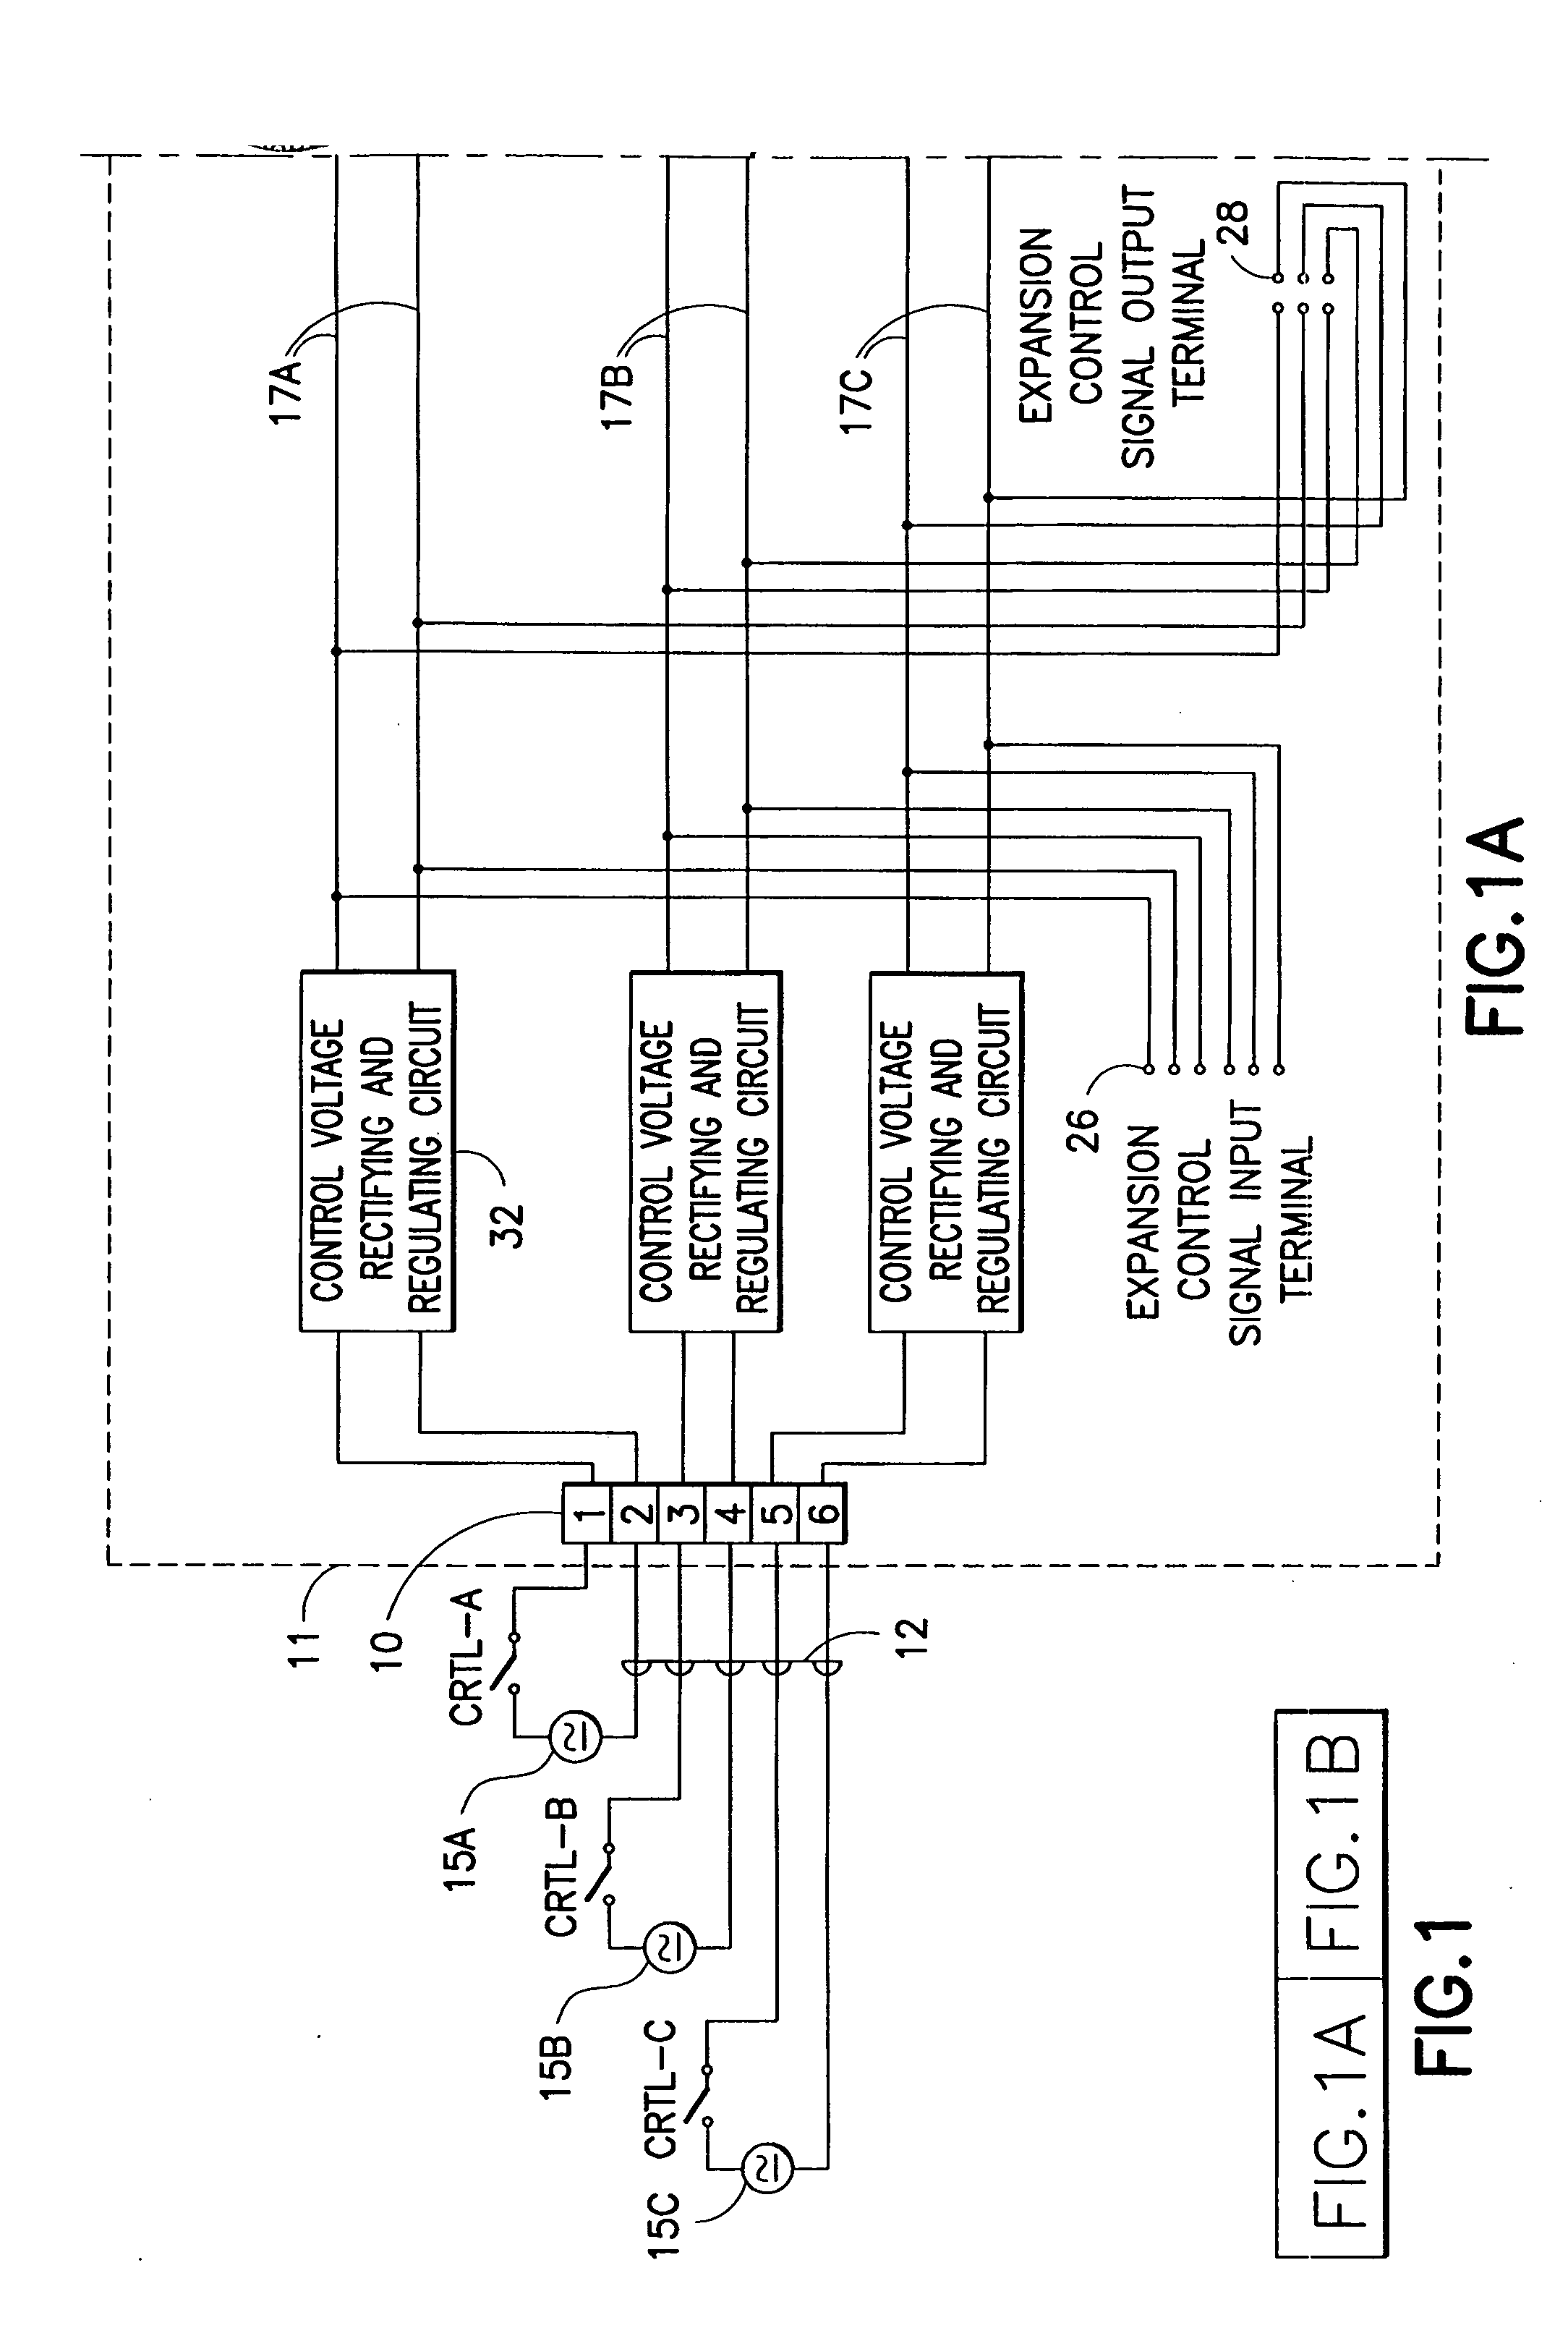 Solid state multi-pole switching device for plug-in switching units